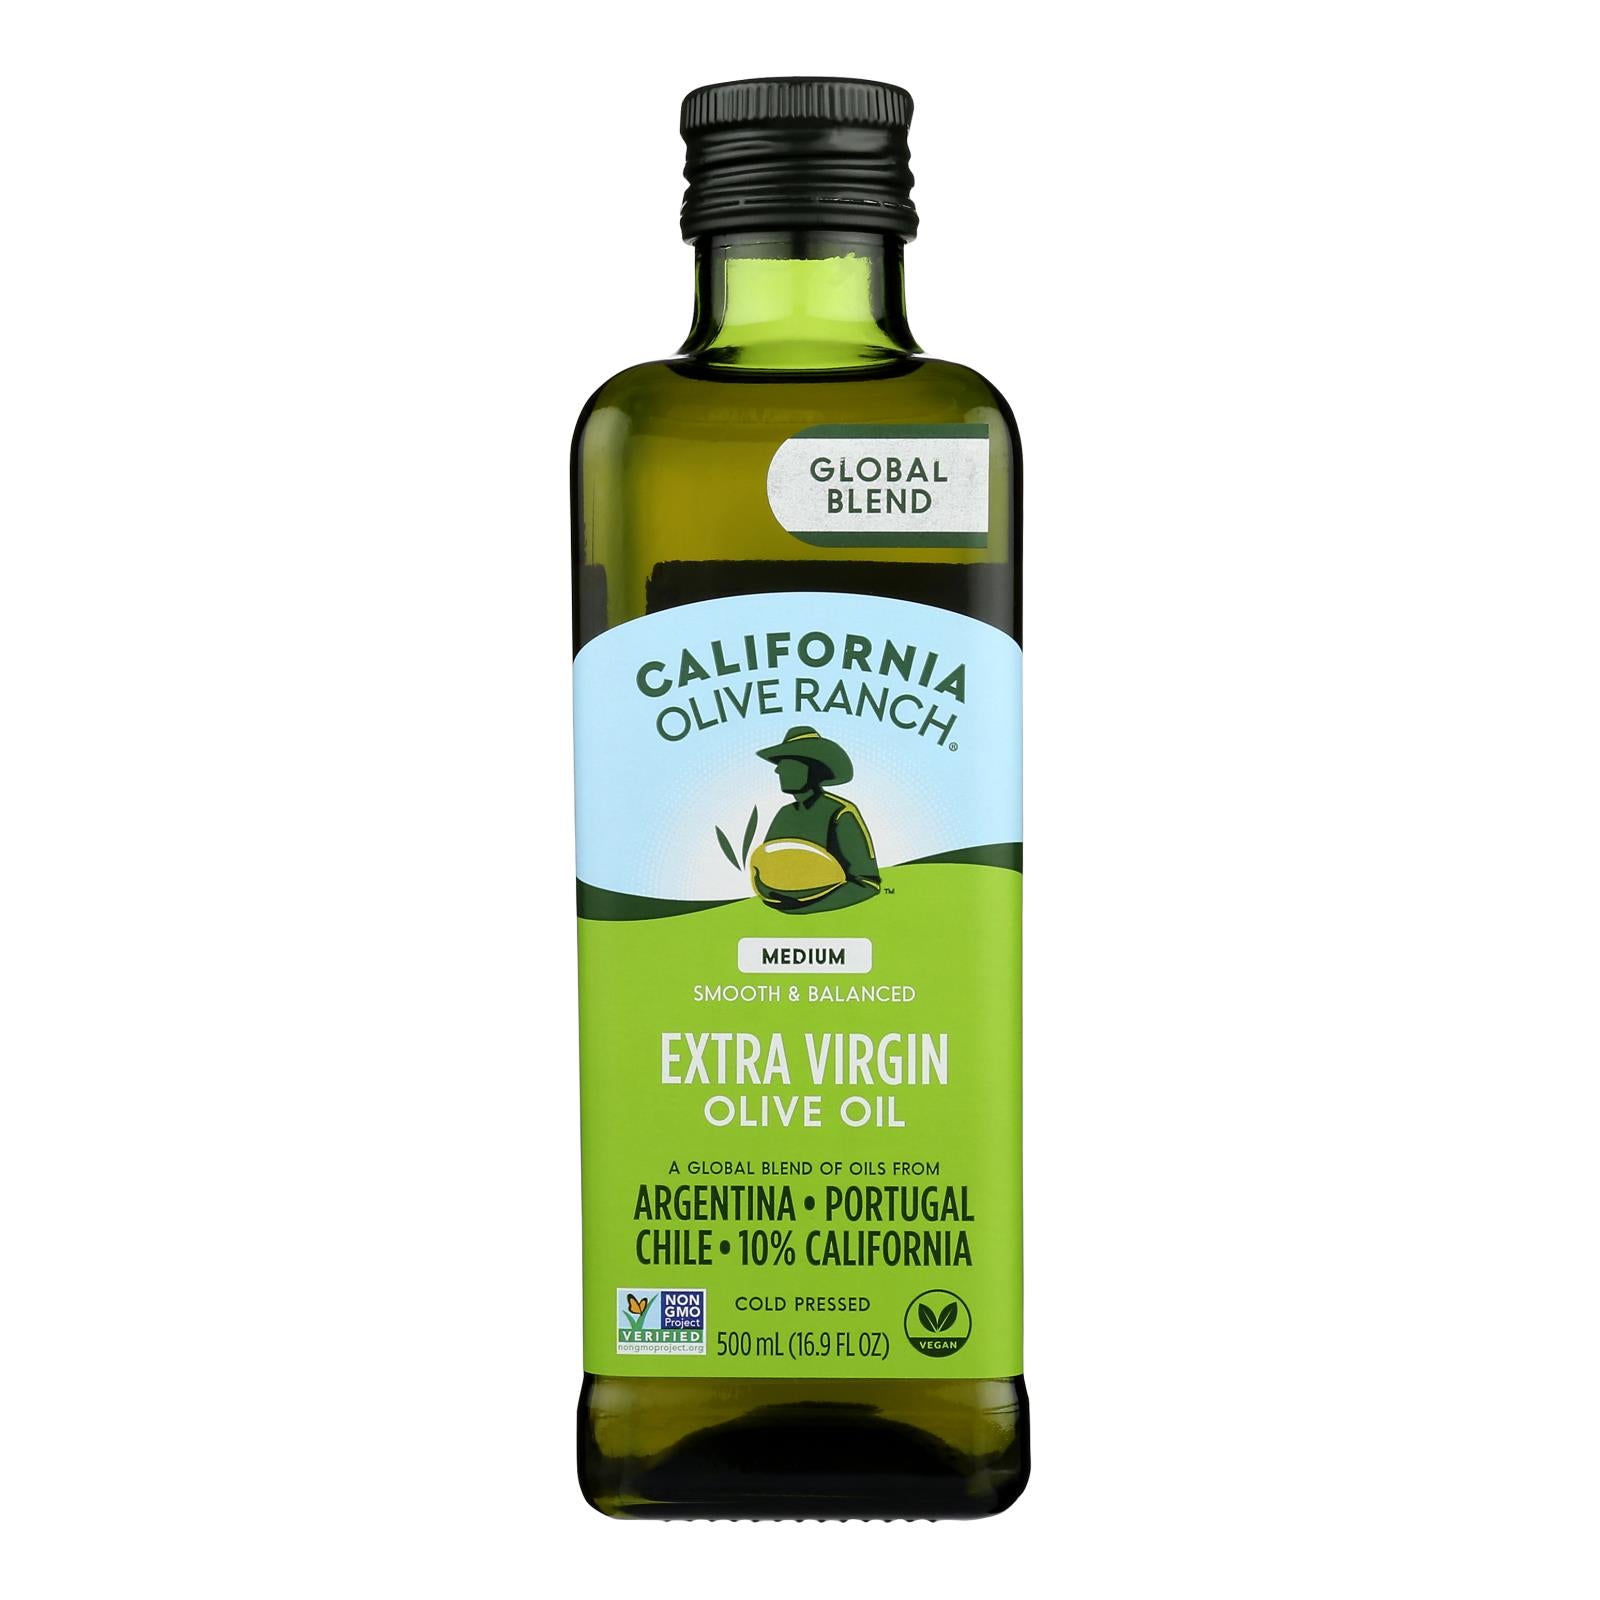 California Olive Ranch Extra Virgin Olive Oil - Everyday - Case Of 12 - 16.9 Fl Oz.